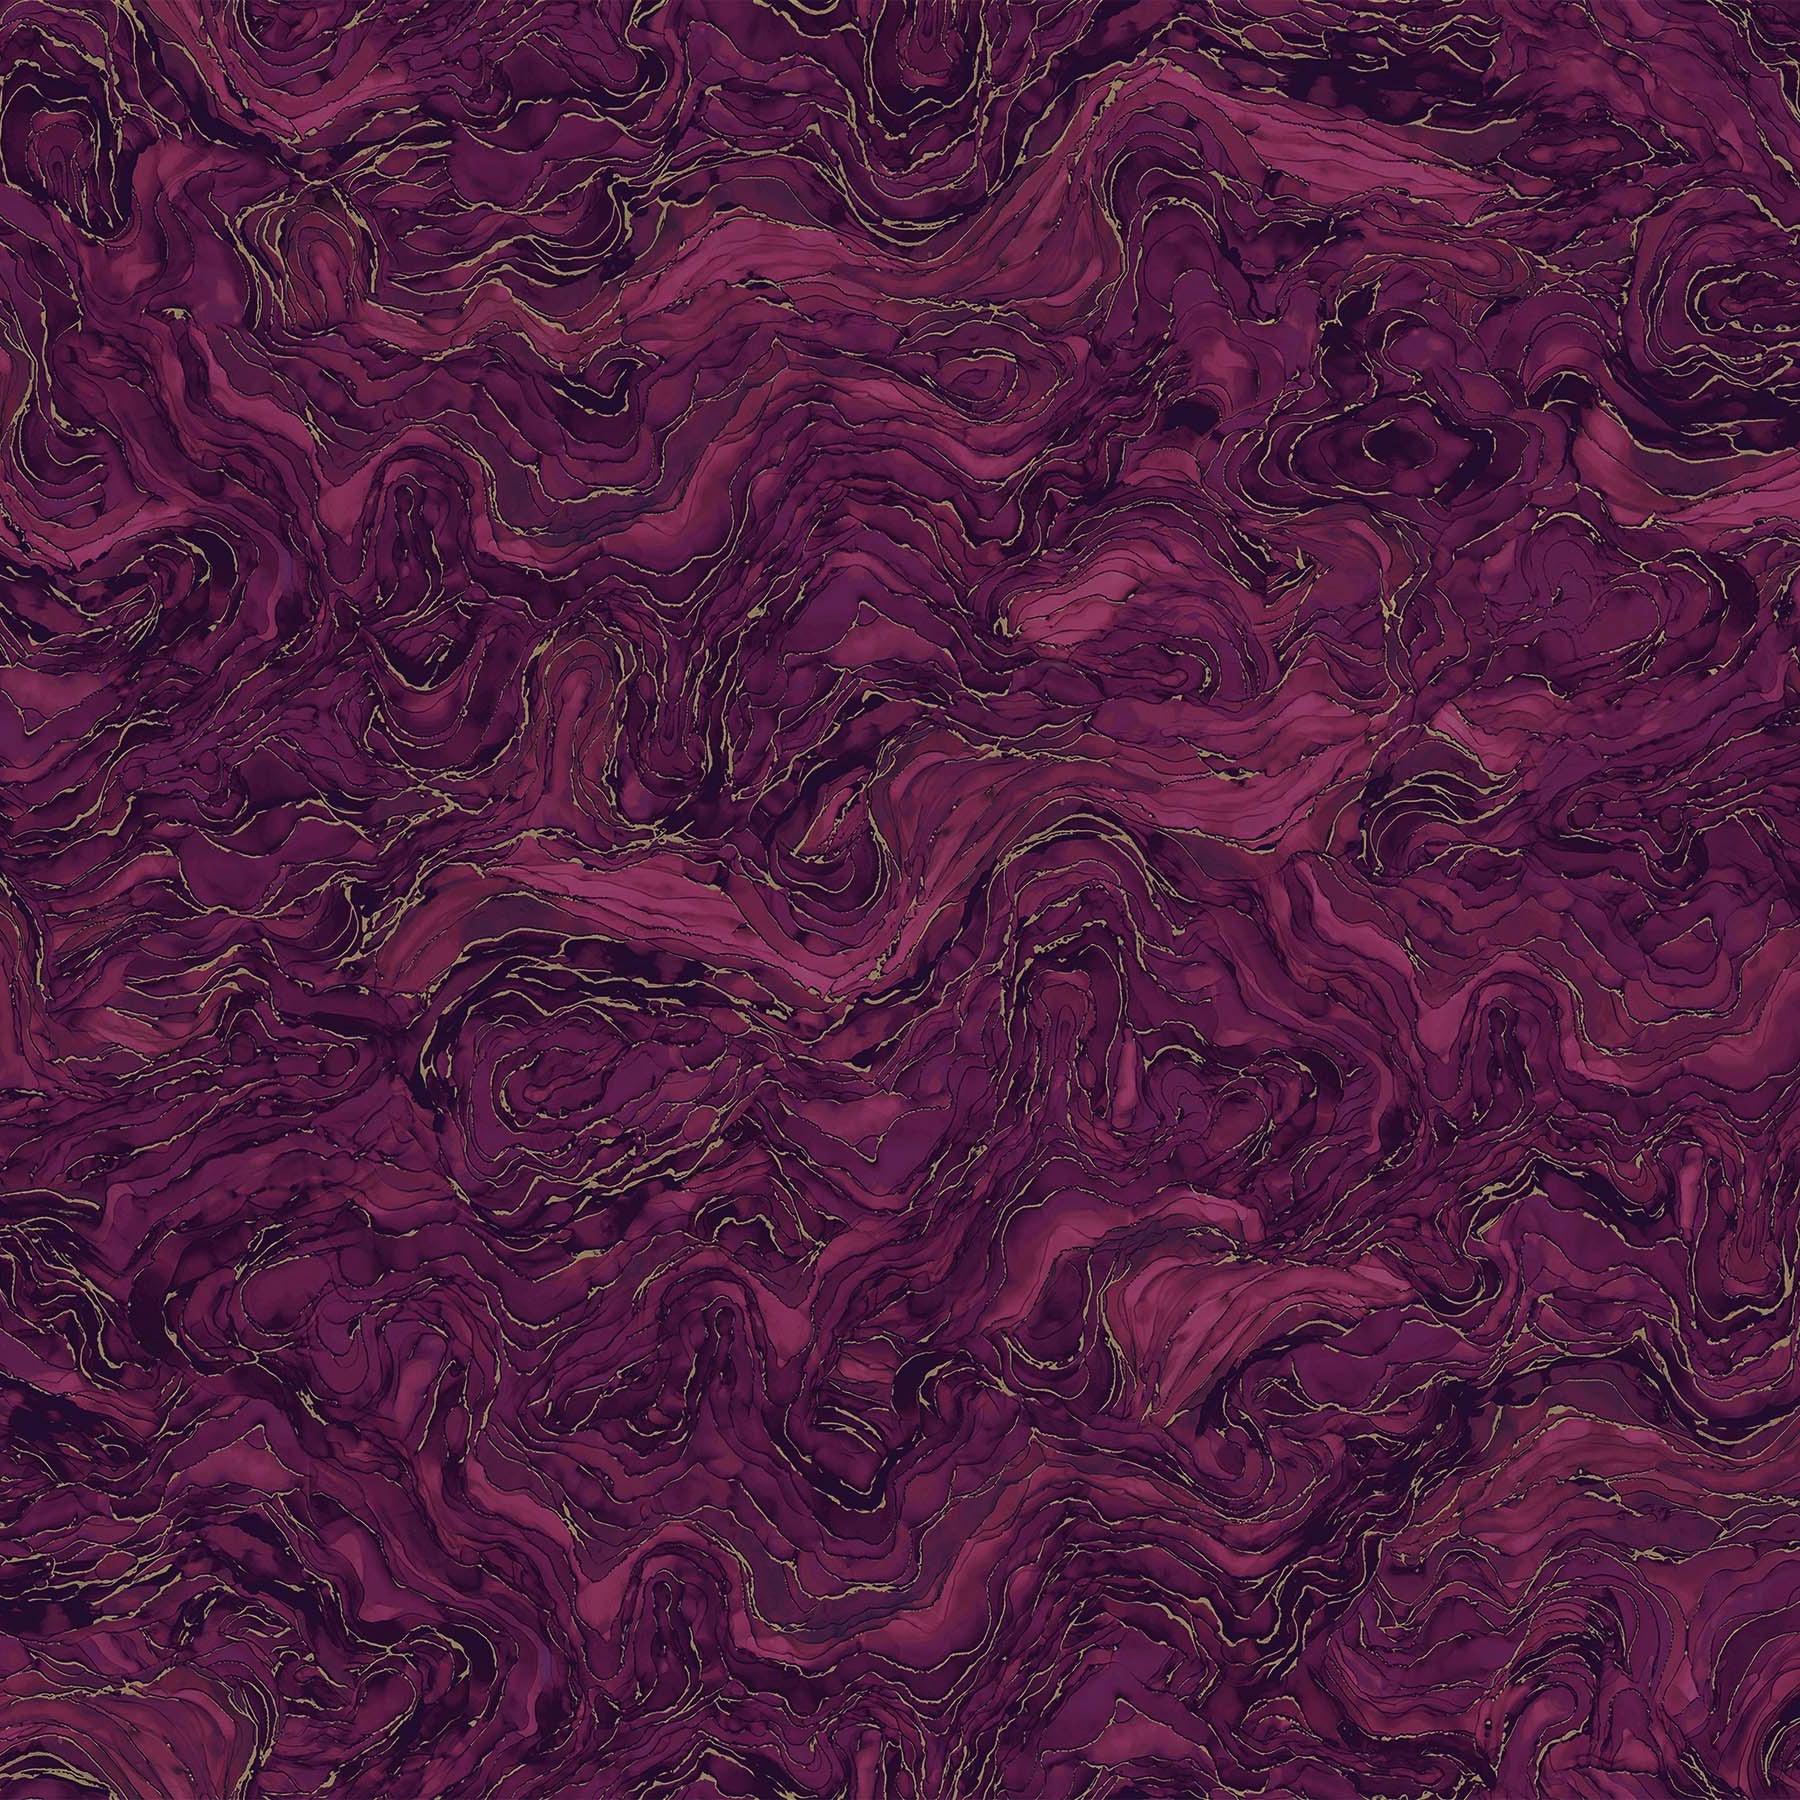 Midas Touch Magenta Abstract Swirl Fabric